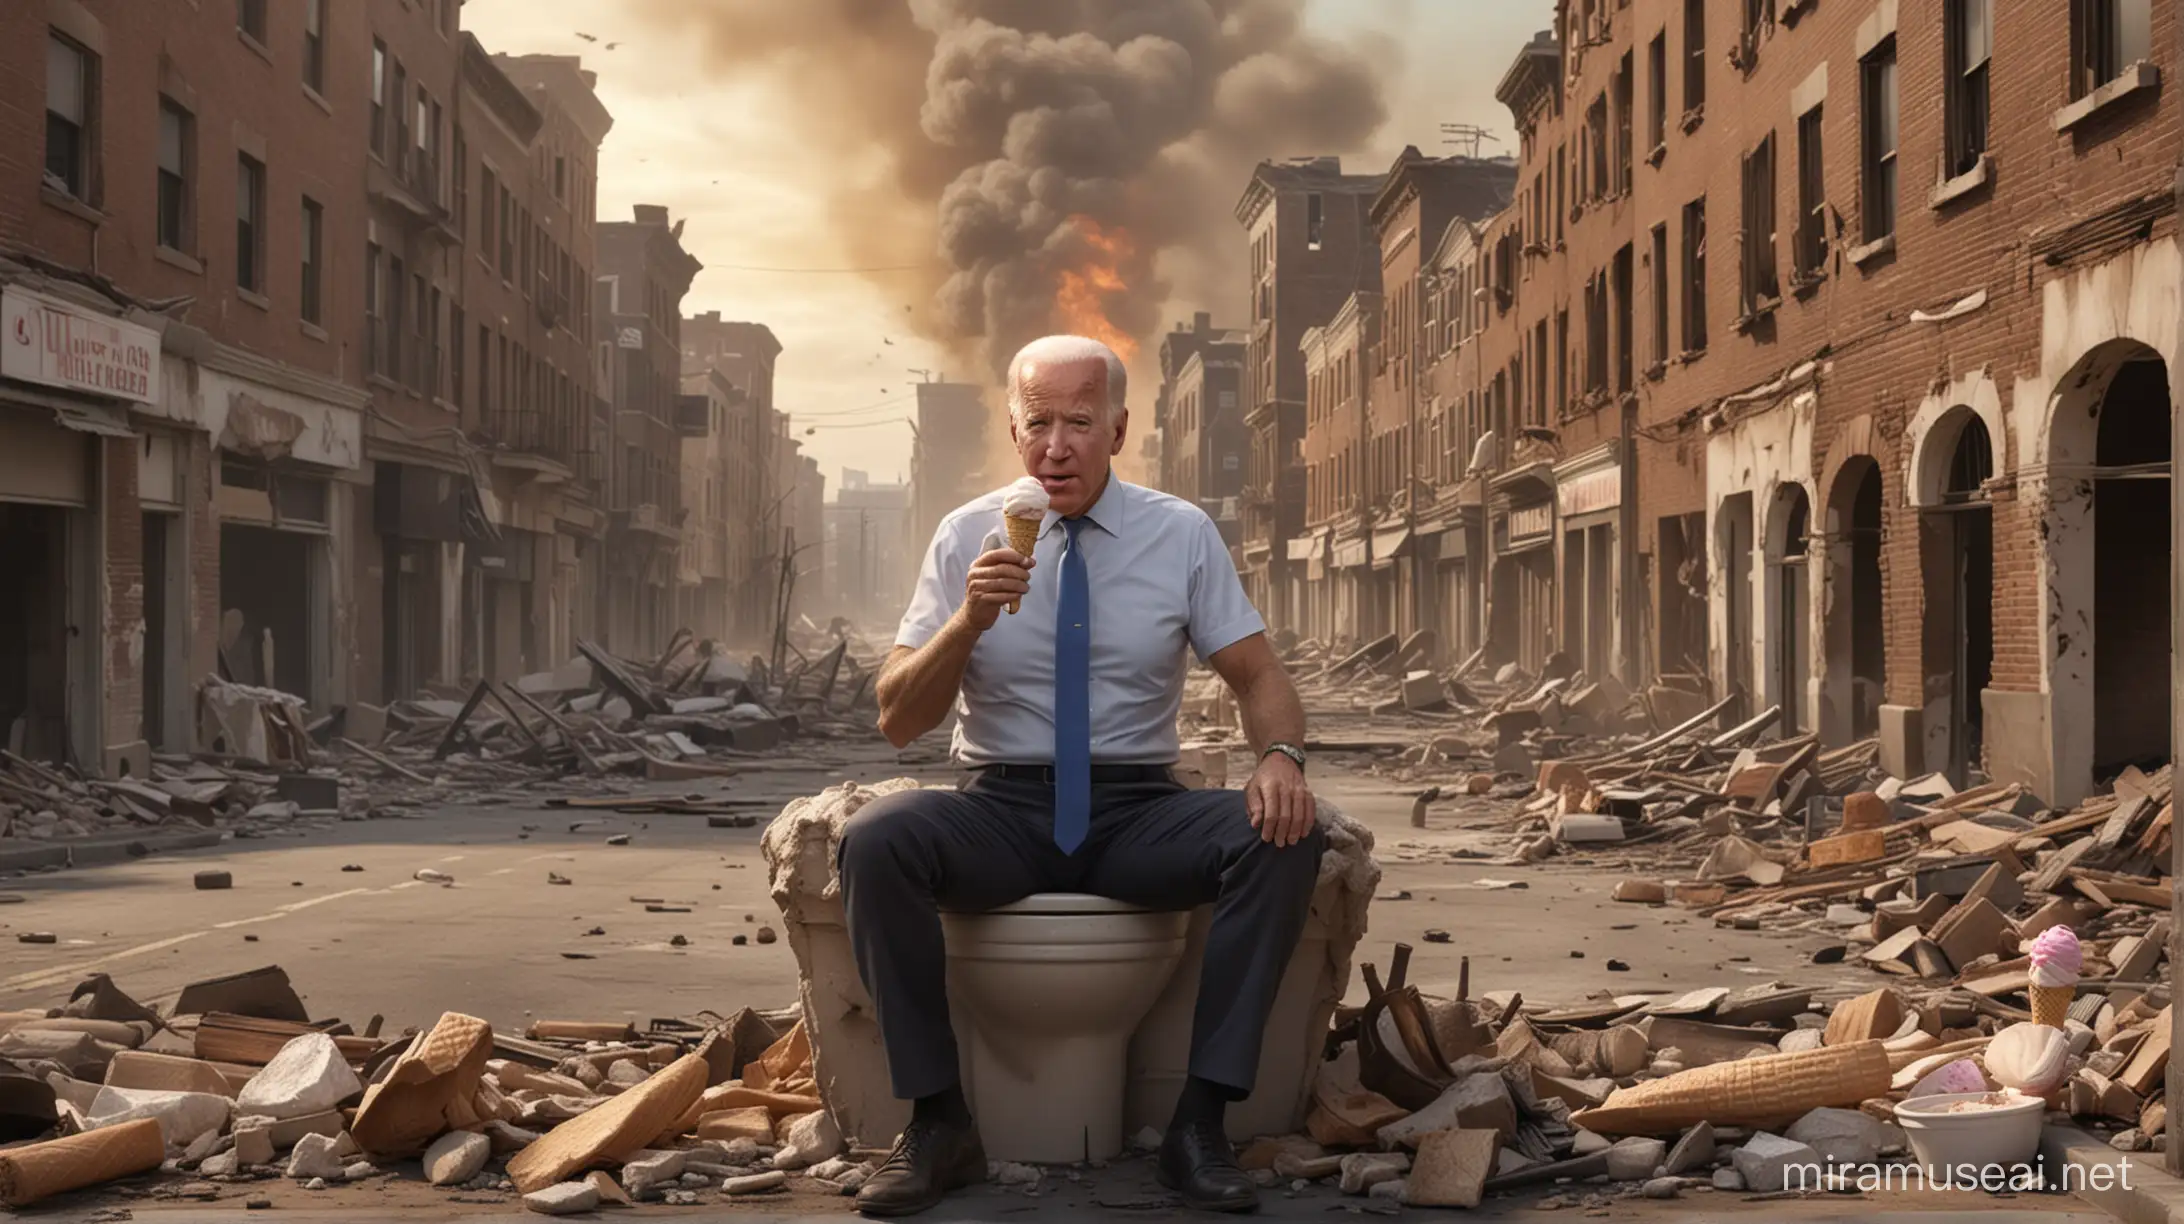 Joe Biden eating an ice cream cone while sitting on a toilet in the middle of a street surrounded by a city in ruins with buildings on fire and scenes of destruction all around. hyperrealistic.